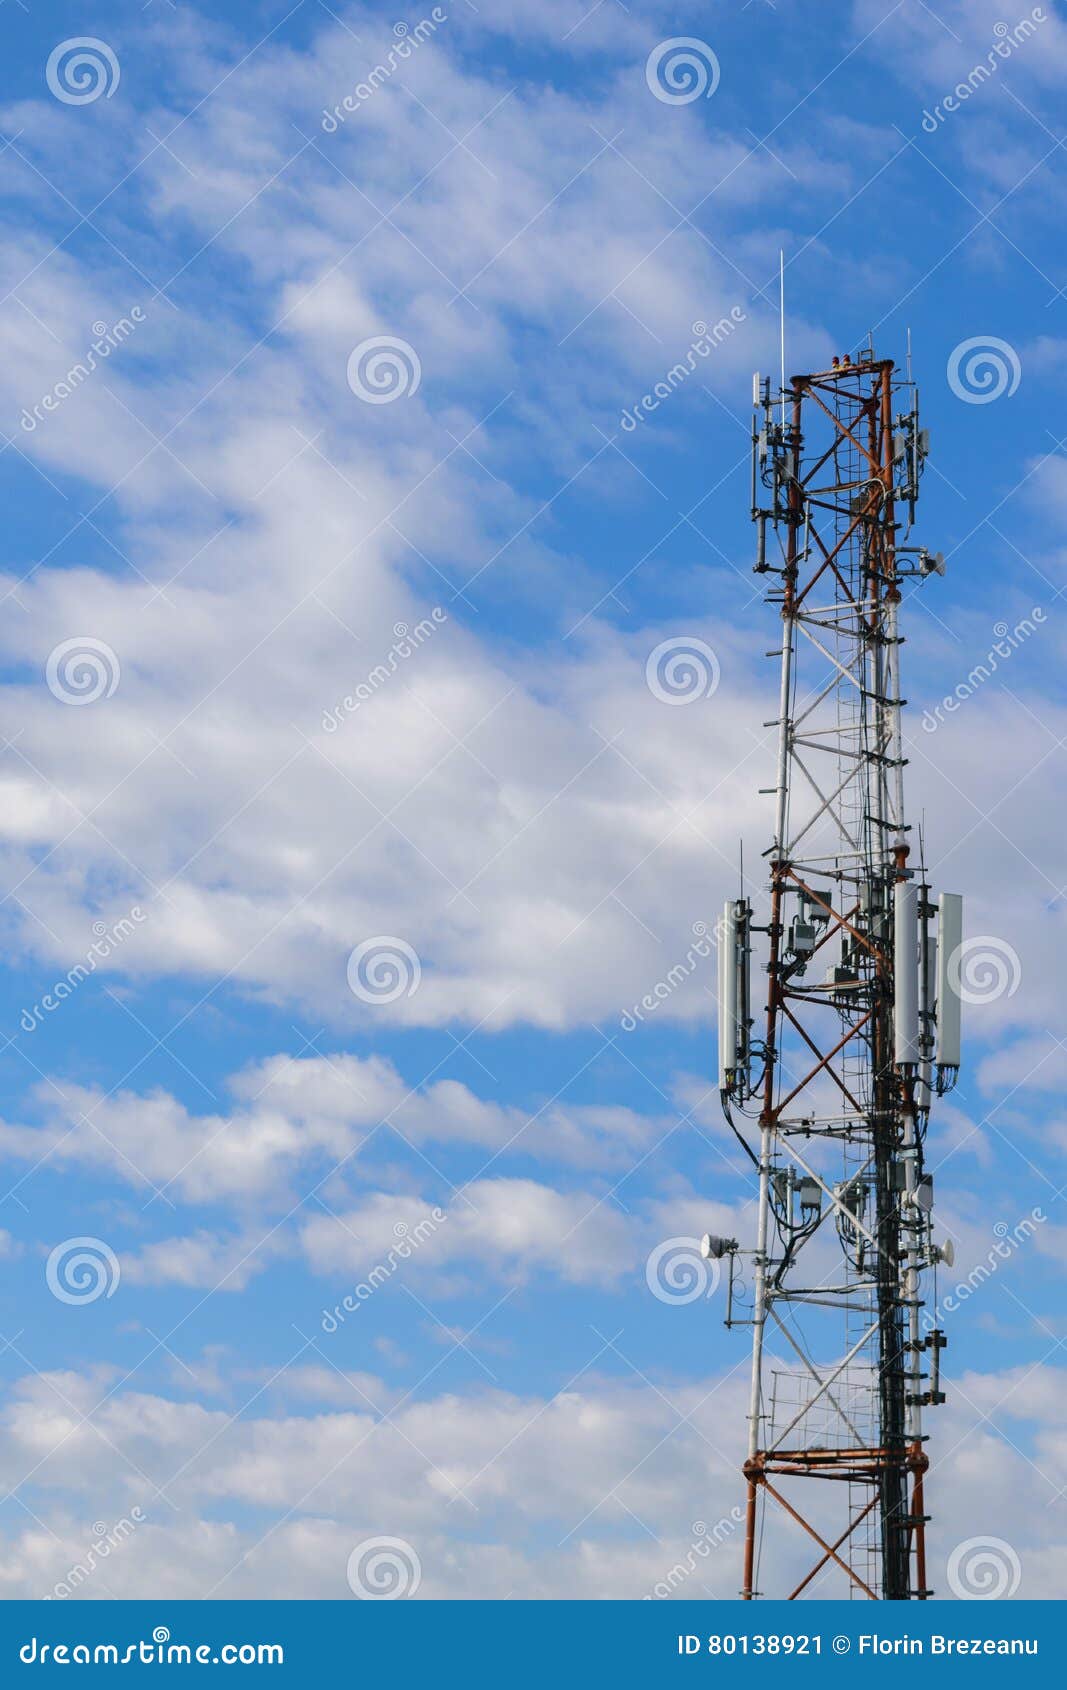 cellular repeter tower for 2g, 3g and 4g transmision - gsm